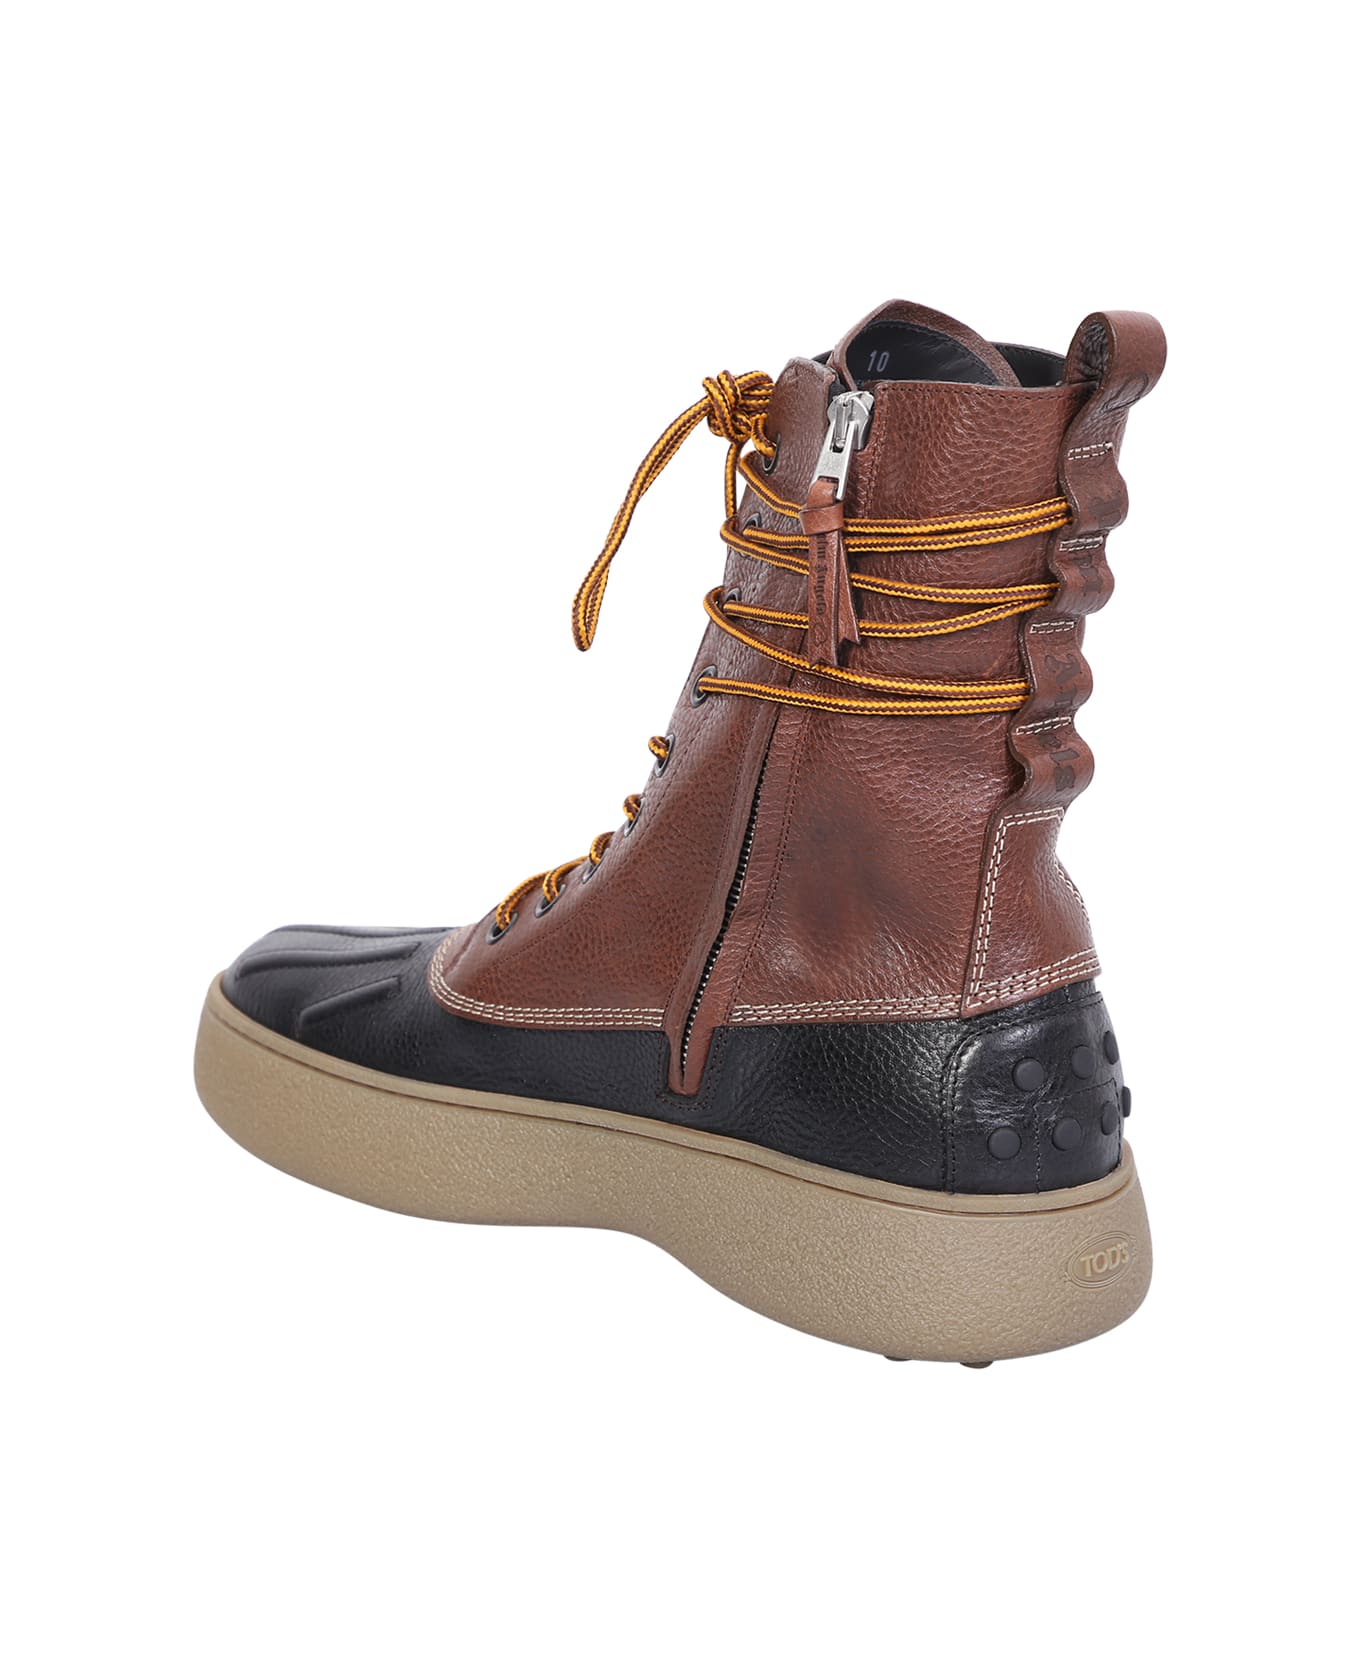 Moncler Genius Winter Gommino Leather Boots - Brown